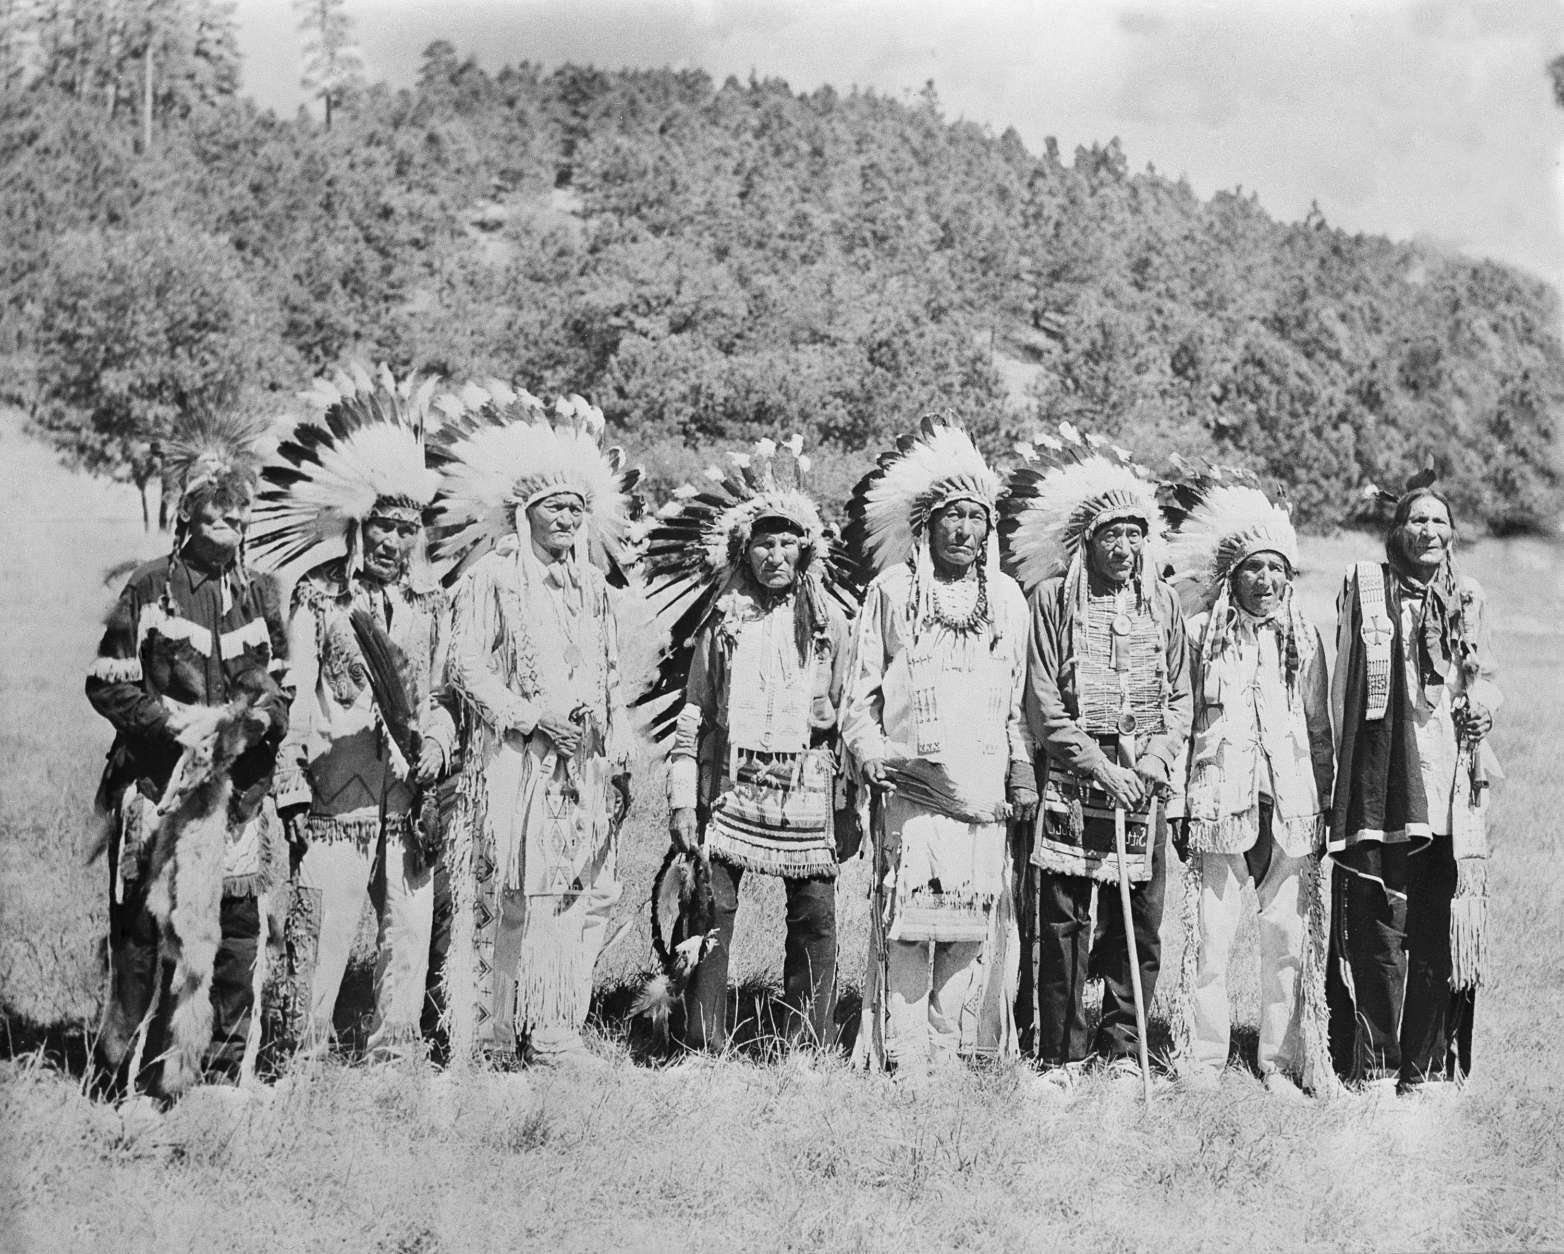 Sioux Indians, six of whom were present at the battle of Little Big Horn, where General George Custer and his soldiers were gathered for a reunion on Sept. 2, 1948 at Custer state park, in South Dakota's Black Hills. (AP Photo)